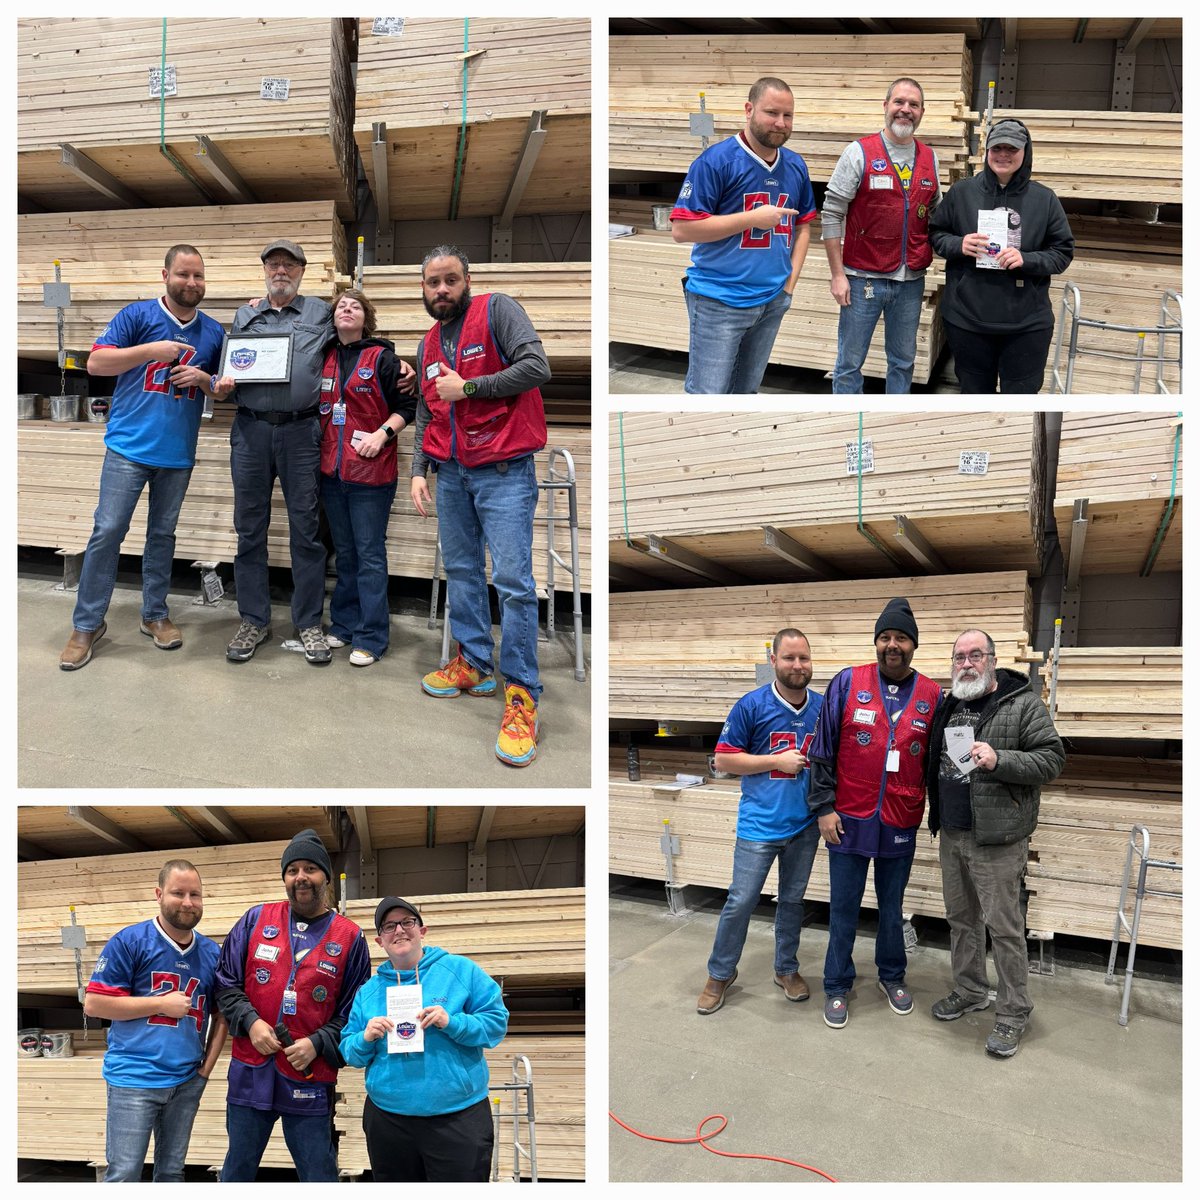 All Store Meeting In Martinsburg Wv 627 Was A Huge Success! Lots of recognition and good information! #Stayhungry @BenitoKomadina @DustinCornell5 @BlueBoxR1 @lowes627 @MikeJDemps